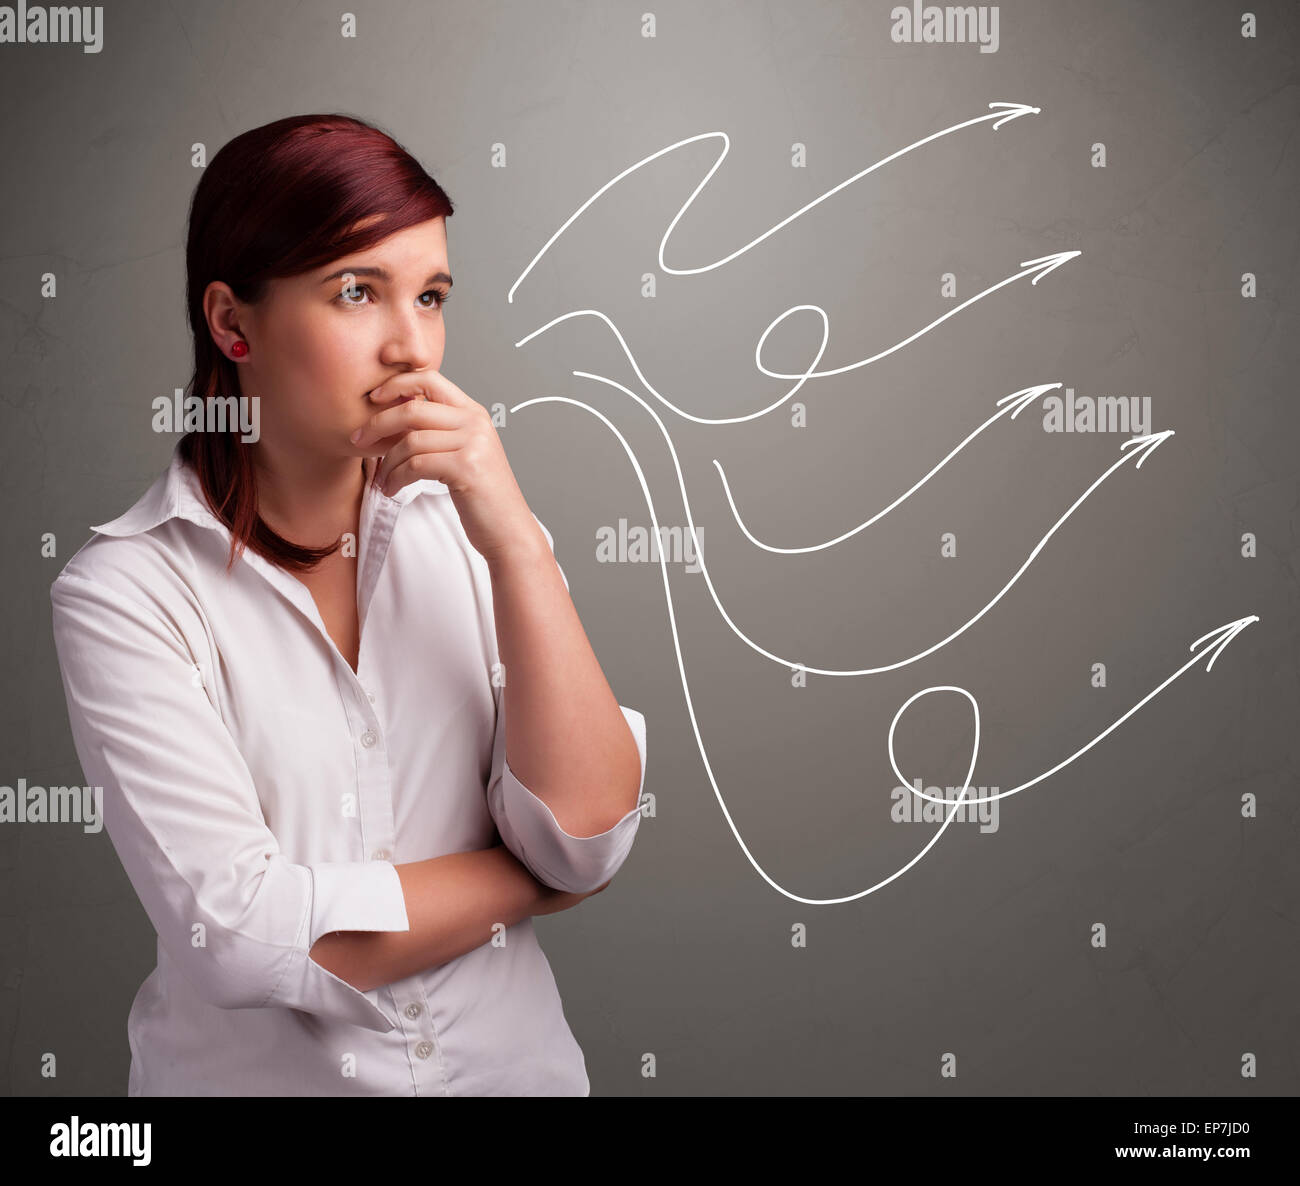 Attractive teenager looking at multiple curly arrows Stock Photo